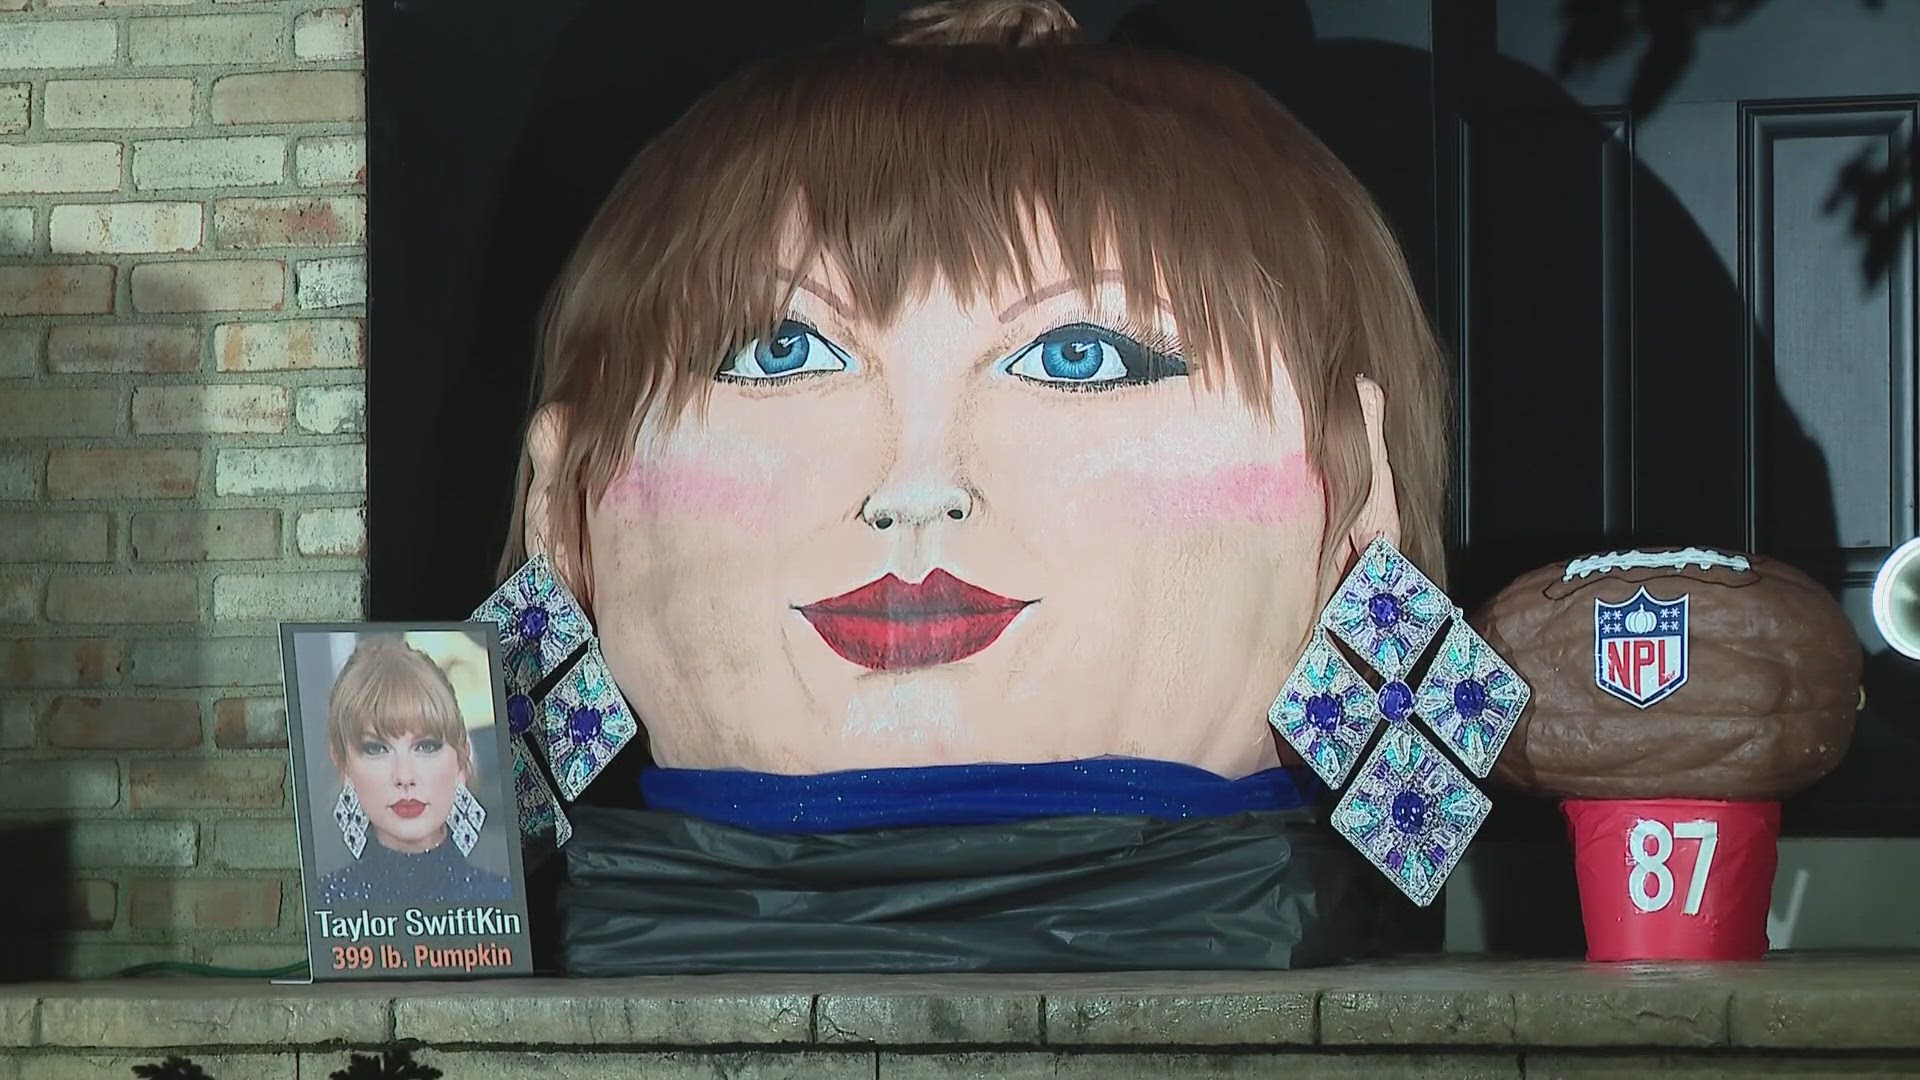 Jeanette Paras created the "Taylor Swiftkin" in Dublin.